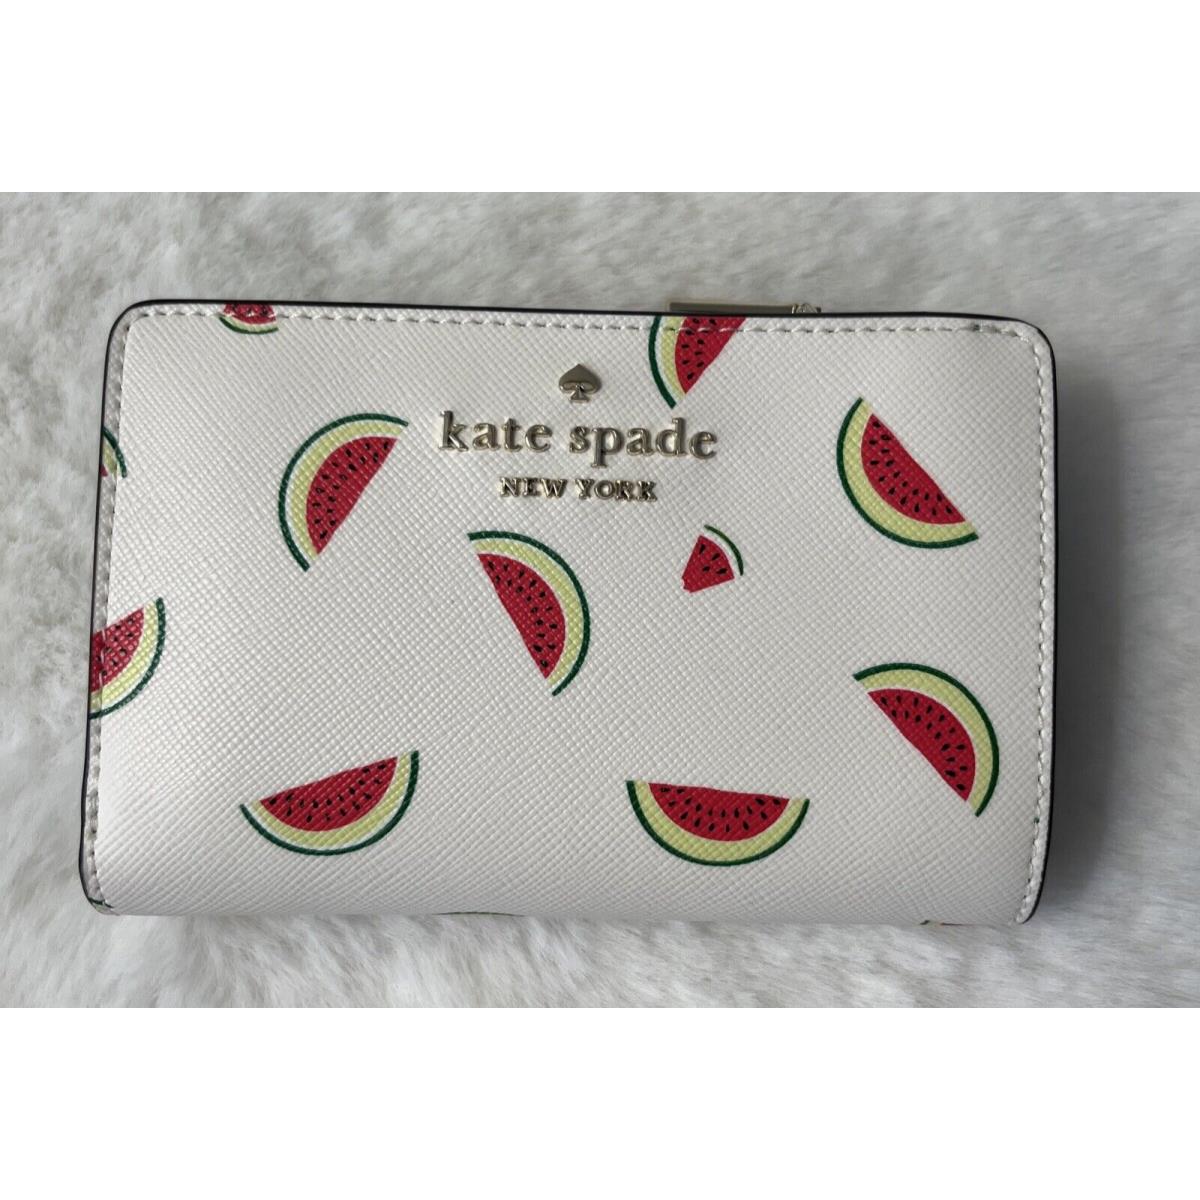 New Kate Spade Staci Watermelon Party Printed Medium Compact